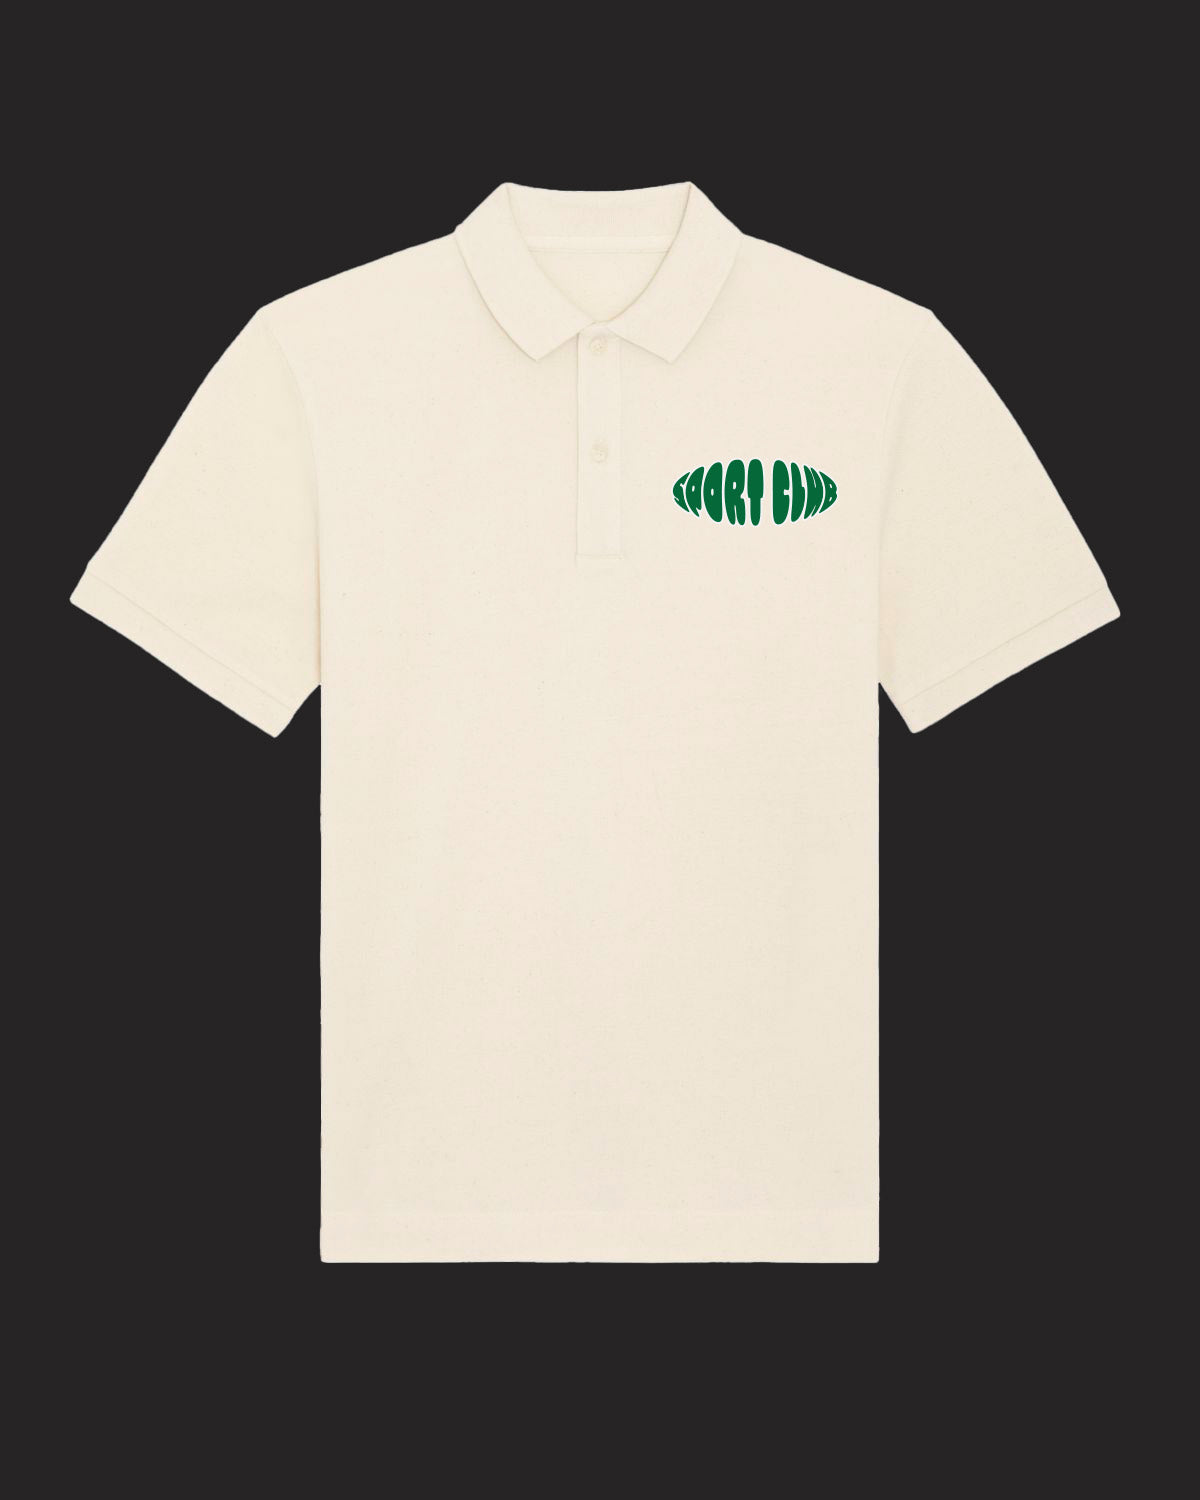 customize your own polo shirt made of 100% GOTS-certified organic cotton